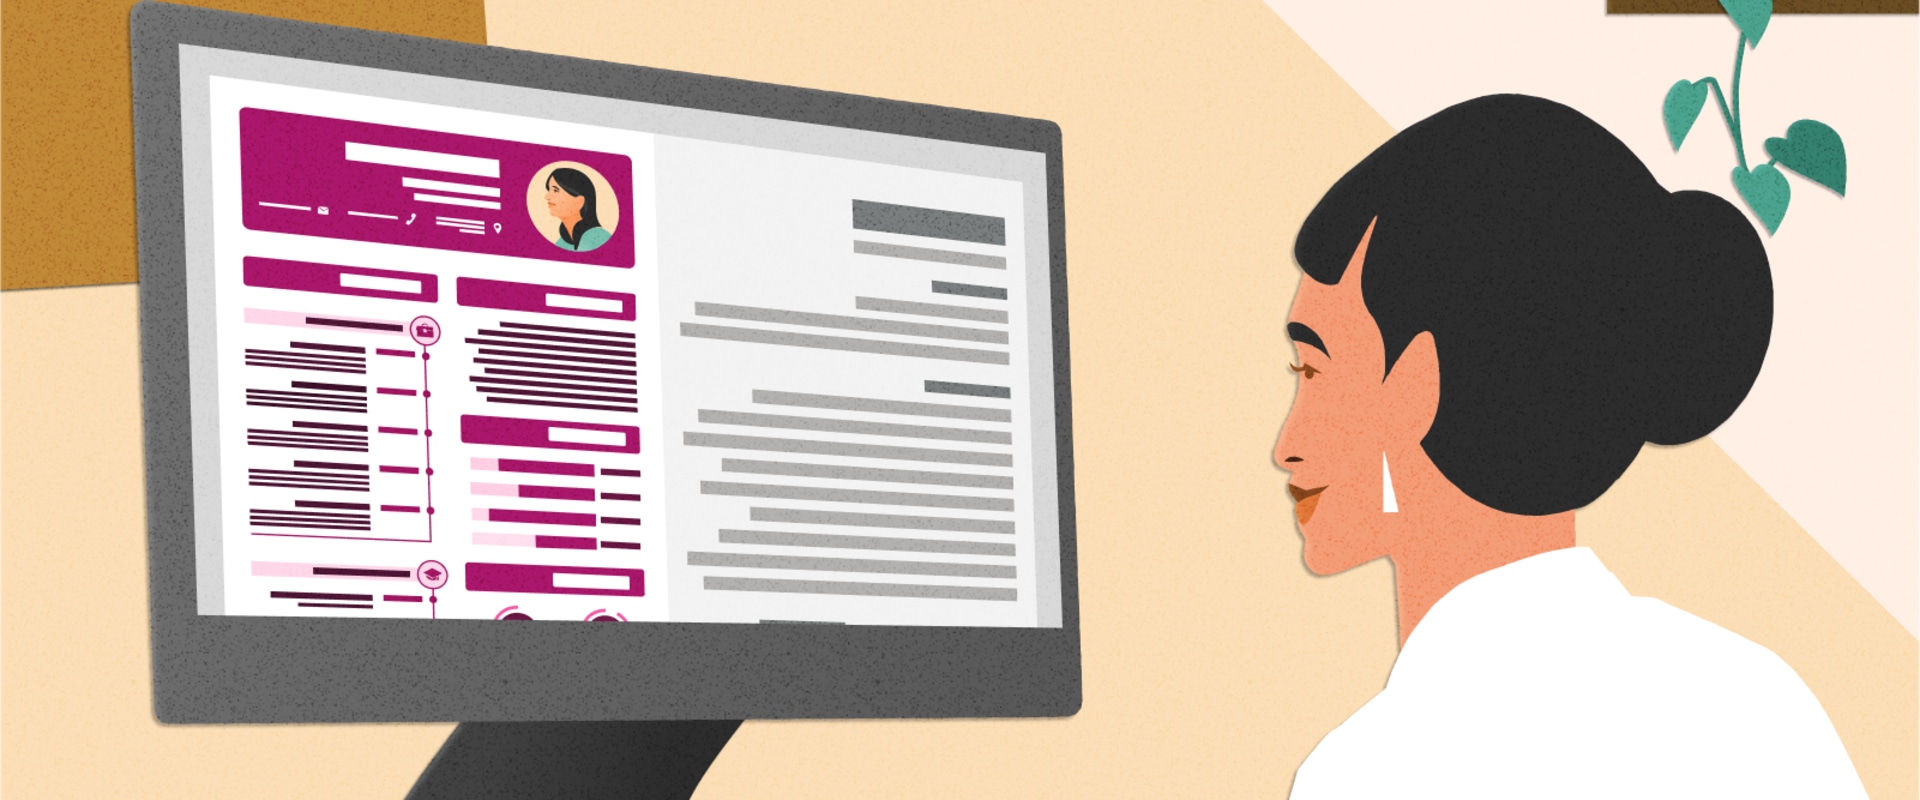 How to Effectively Screen and Select Resumes for Your Next Hire